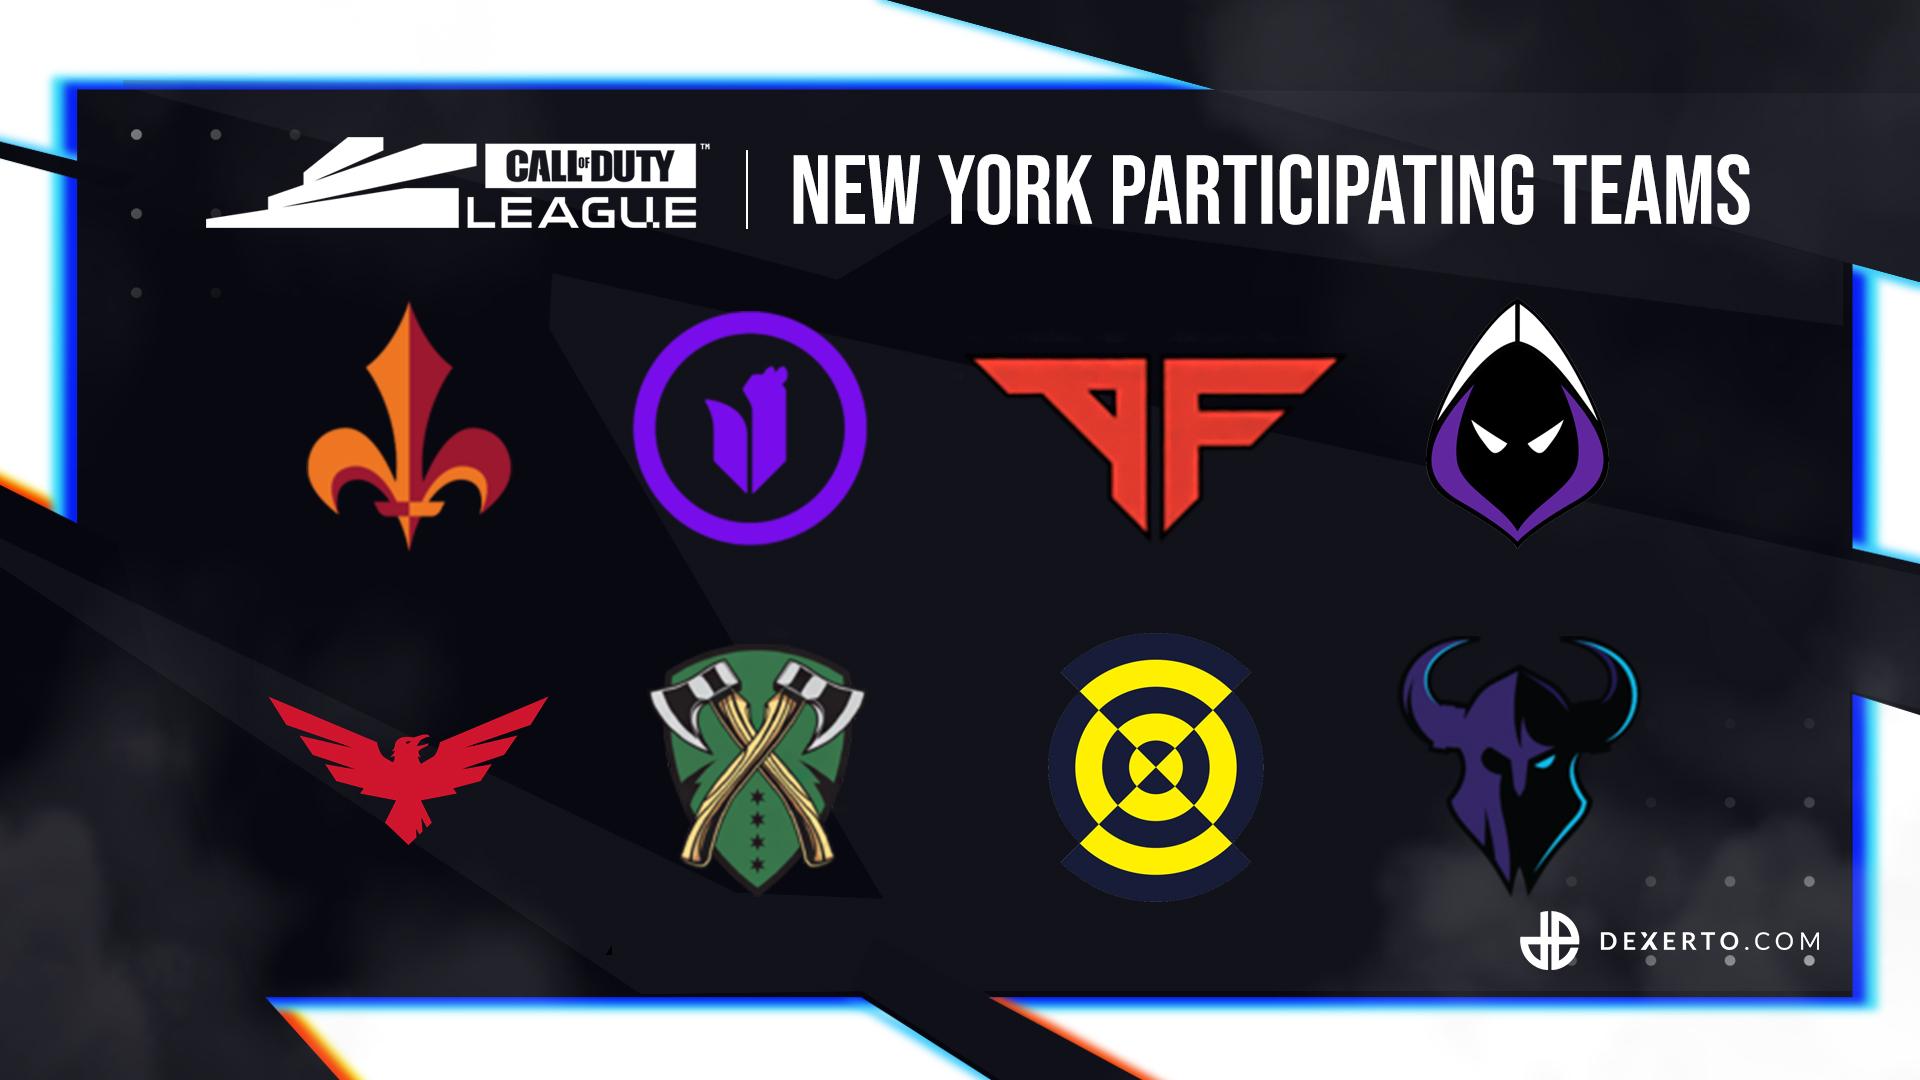 CDL New York participating teams.